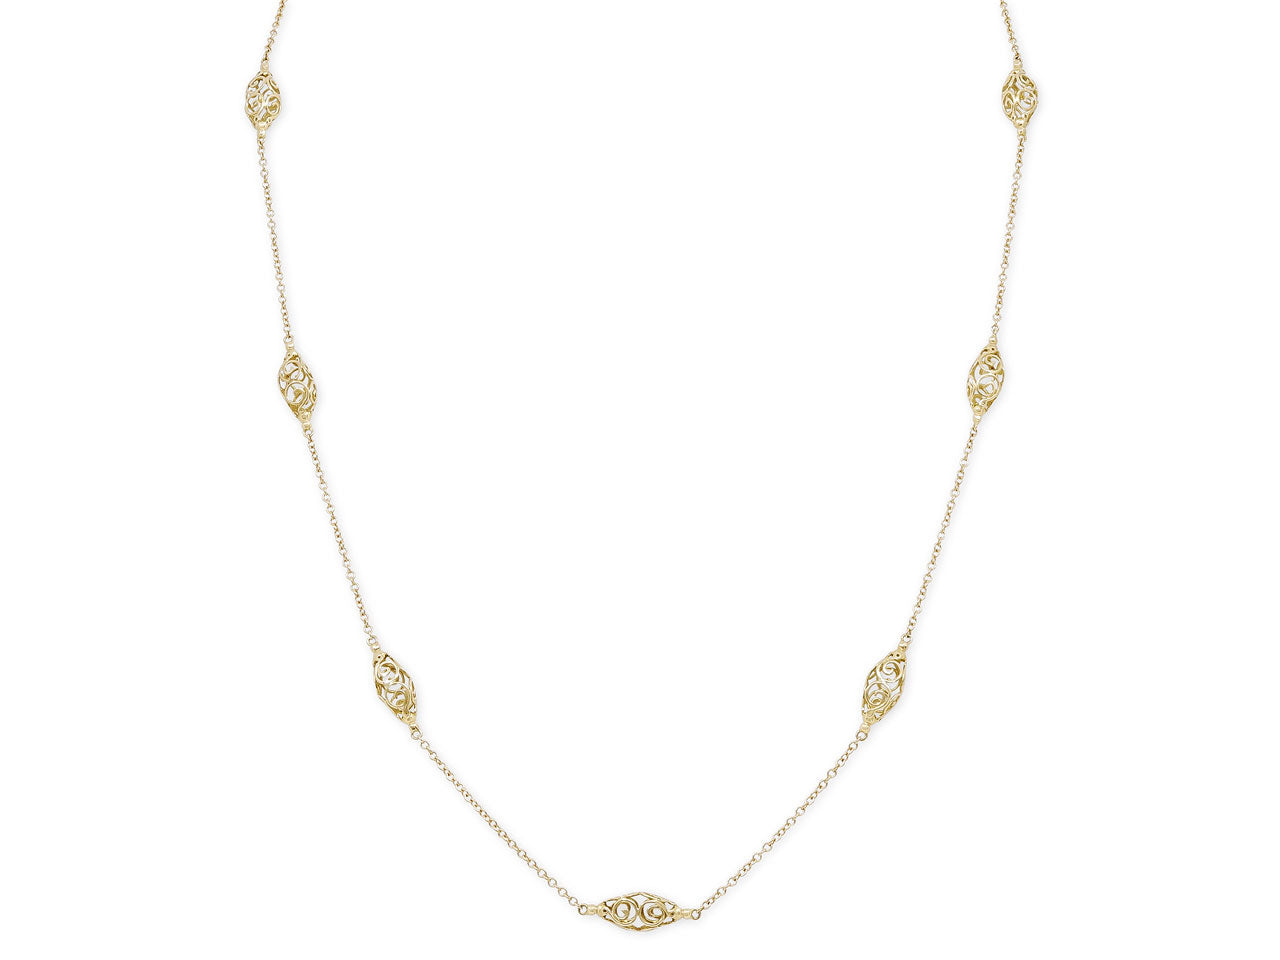 Tiffany & Co. Paloma Picasso Necklace in 18K Gold